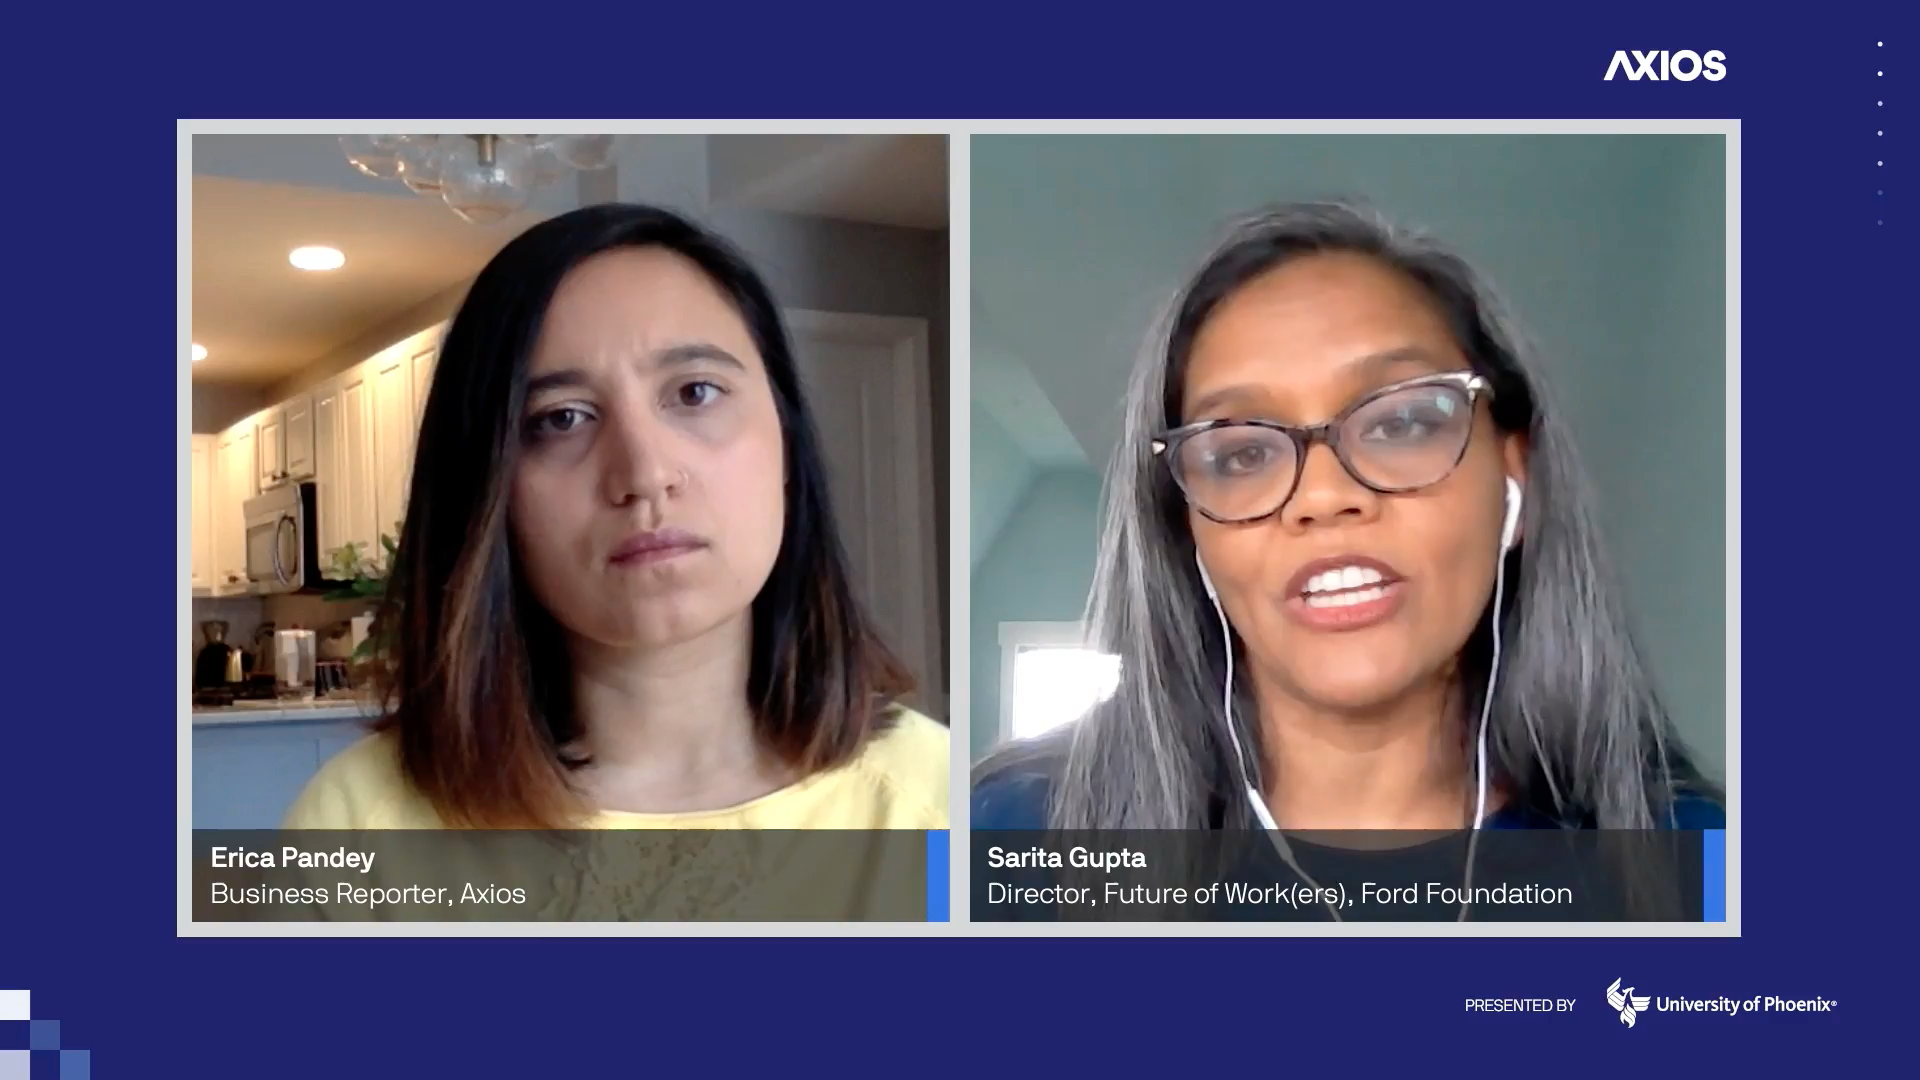 Screenshot of an Axios virtual event with Axios' Erica Pandey on the left and Ford Director of Future of Work Sarita Gupta on the right